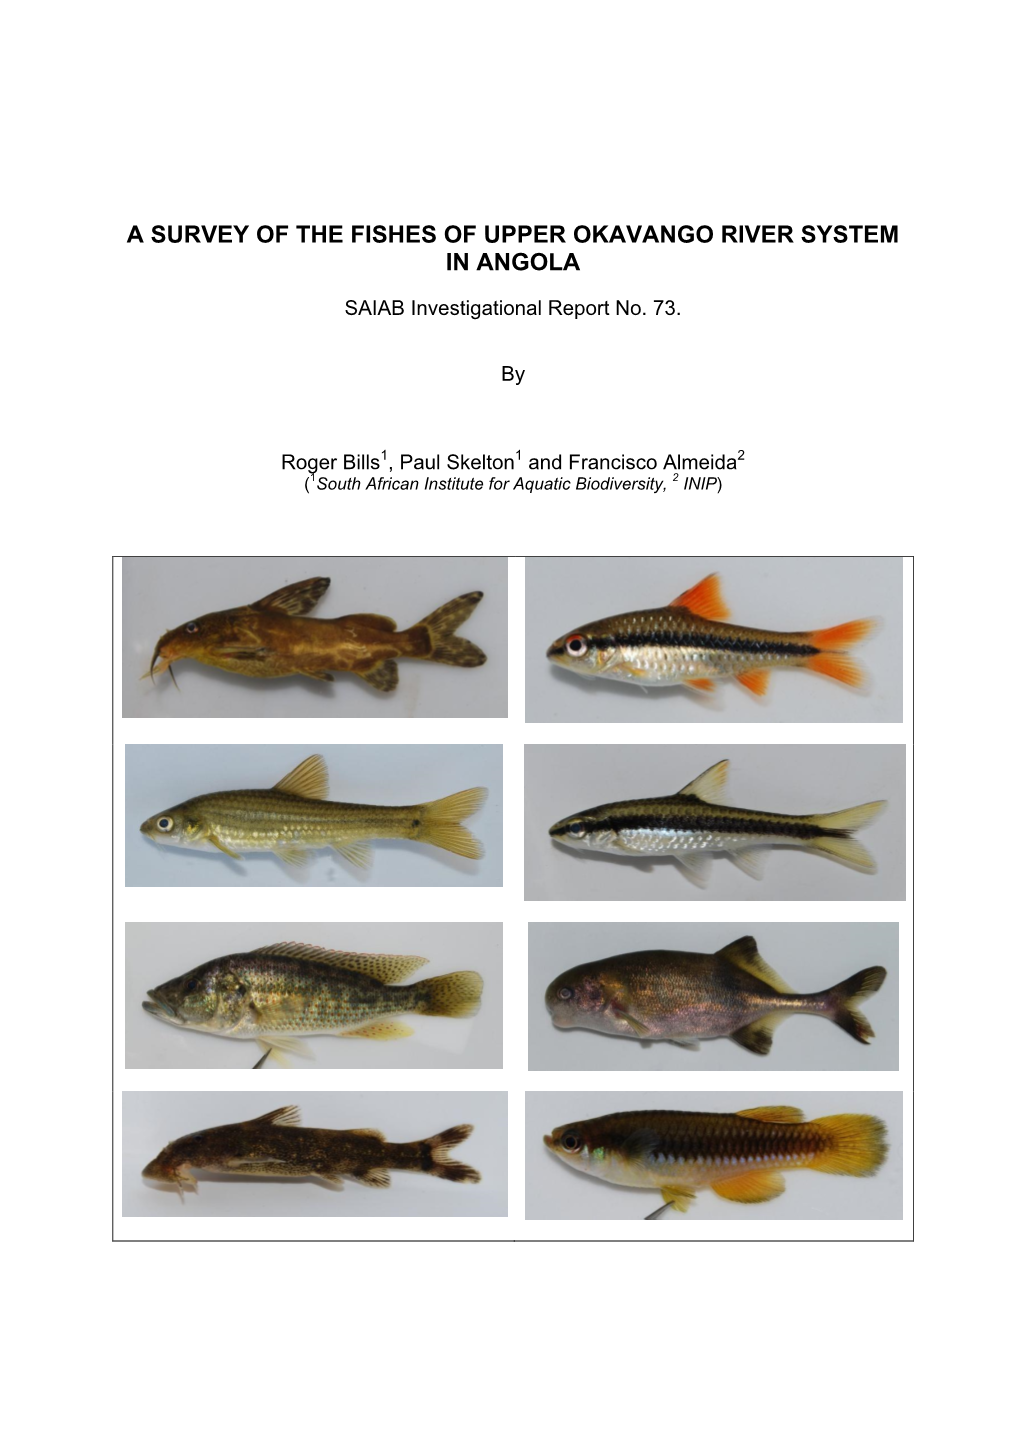 A Survey of the Fishes of Upper Okavango River System in Angola